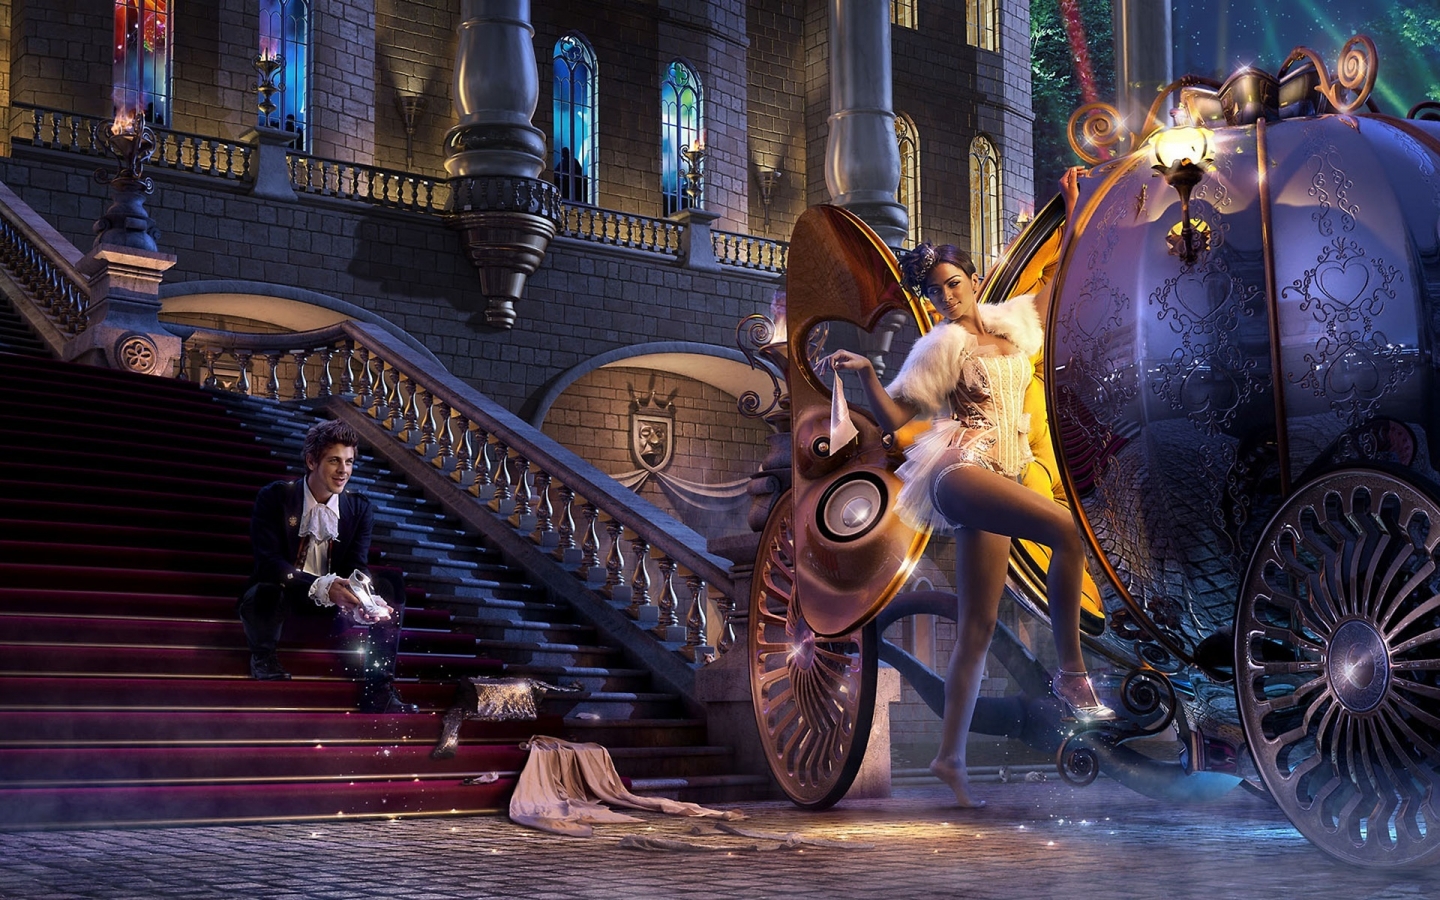 Animated Cinderella for 1440 x 900 widescreen resolution